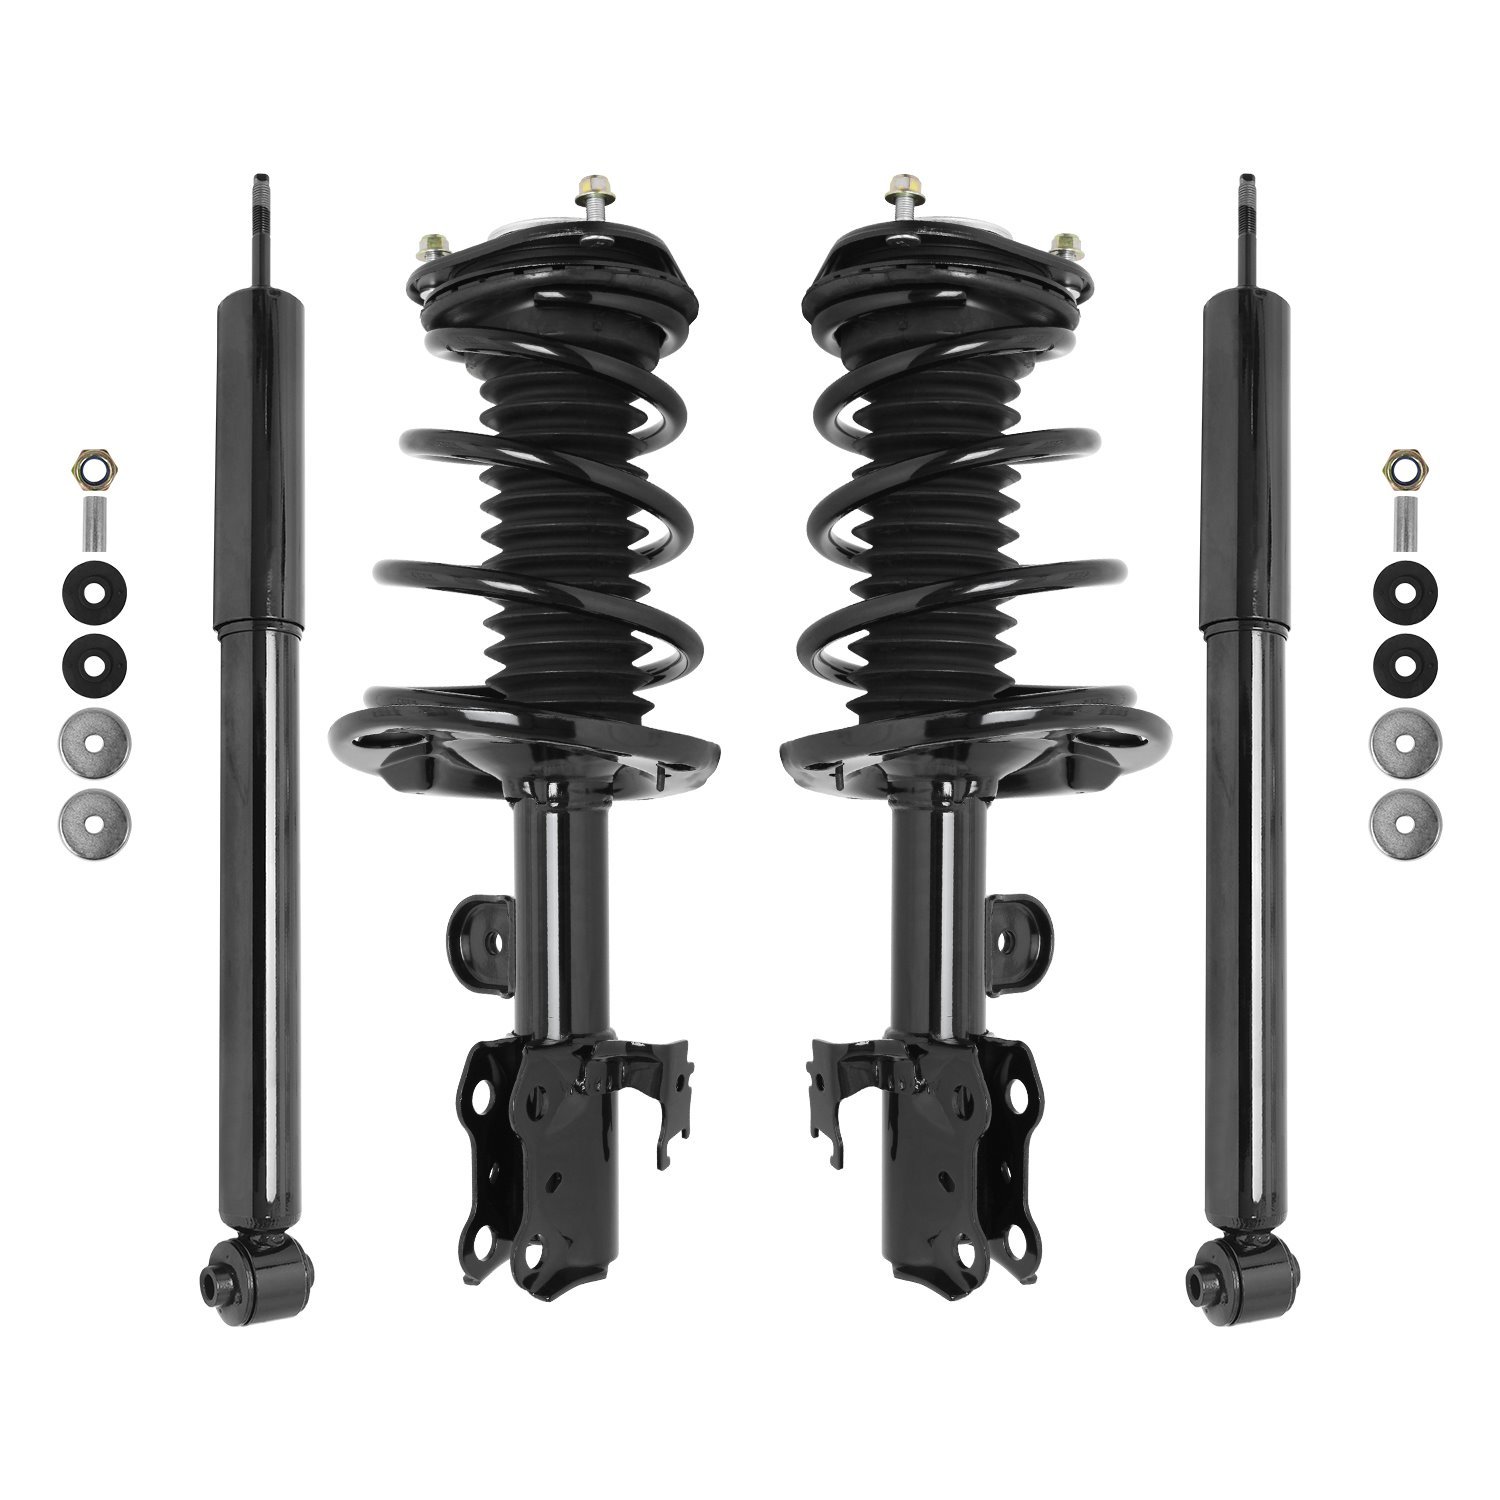 4-11803-259050-001 Front & Rear Suspension Strut & Coil Spring Assembly Fits Select Scion tC